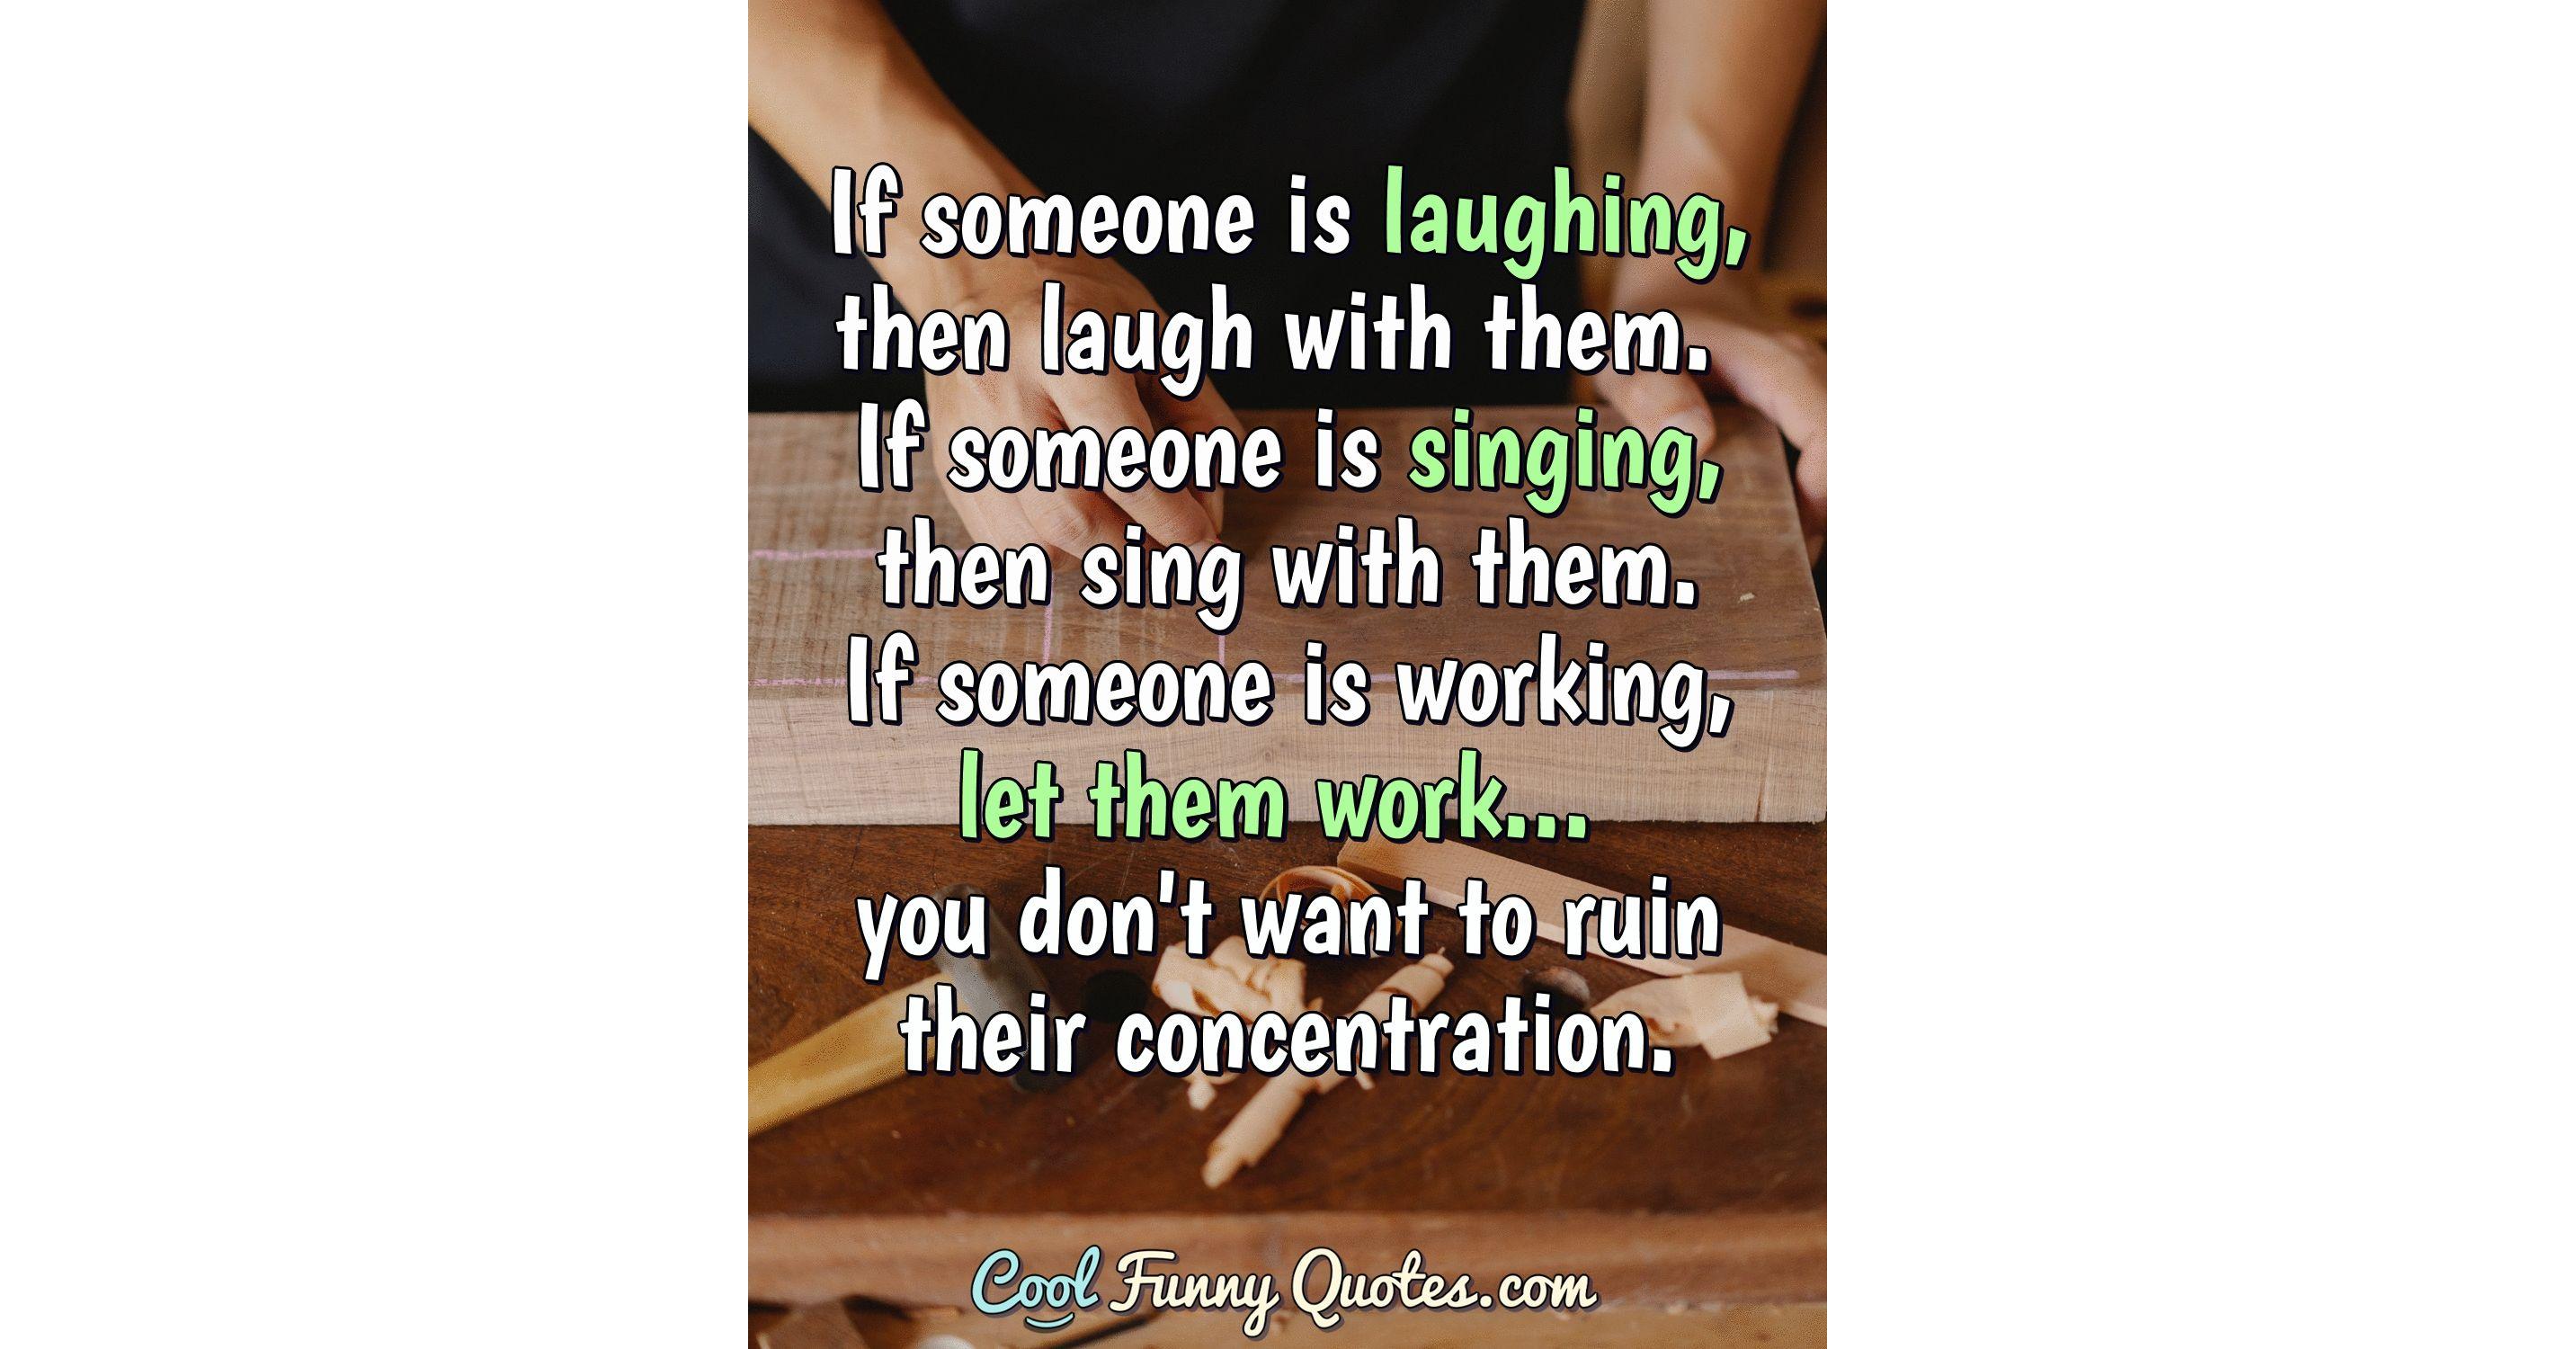 If someone is laughing, then laugh with them. If someone is singing